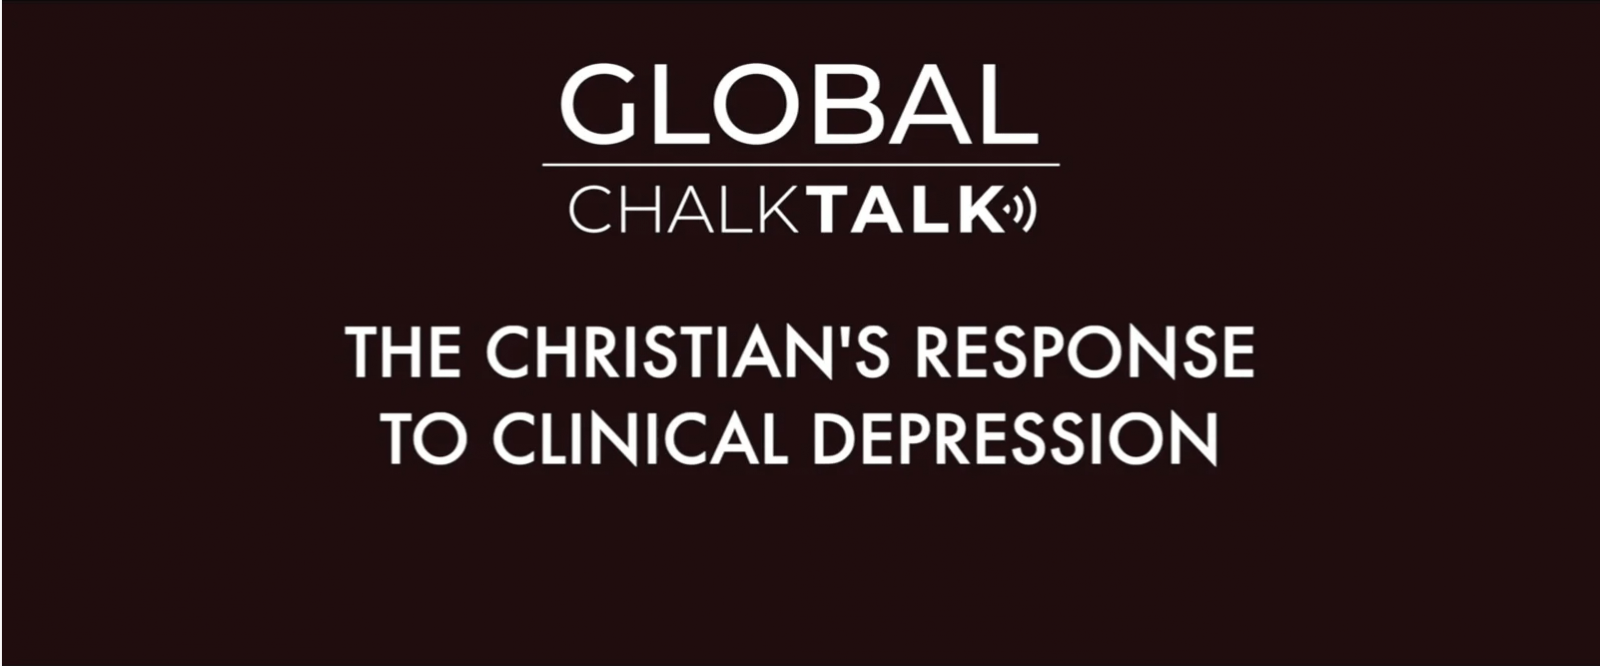 Global Chalk Talk, The Christian's Response to Clinical Depression